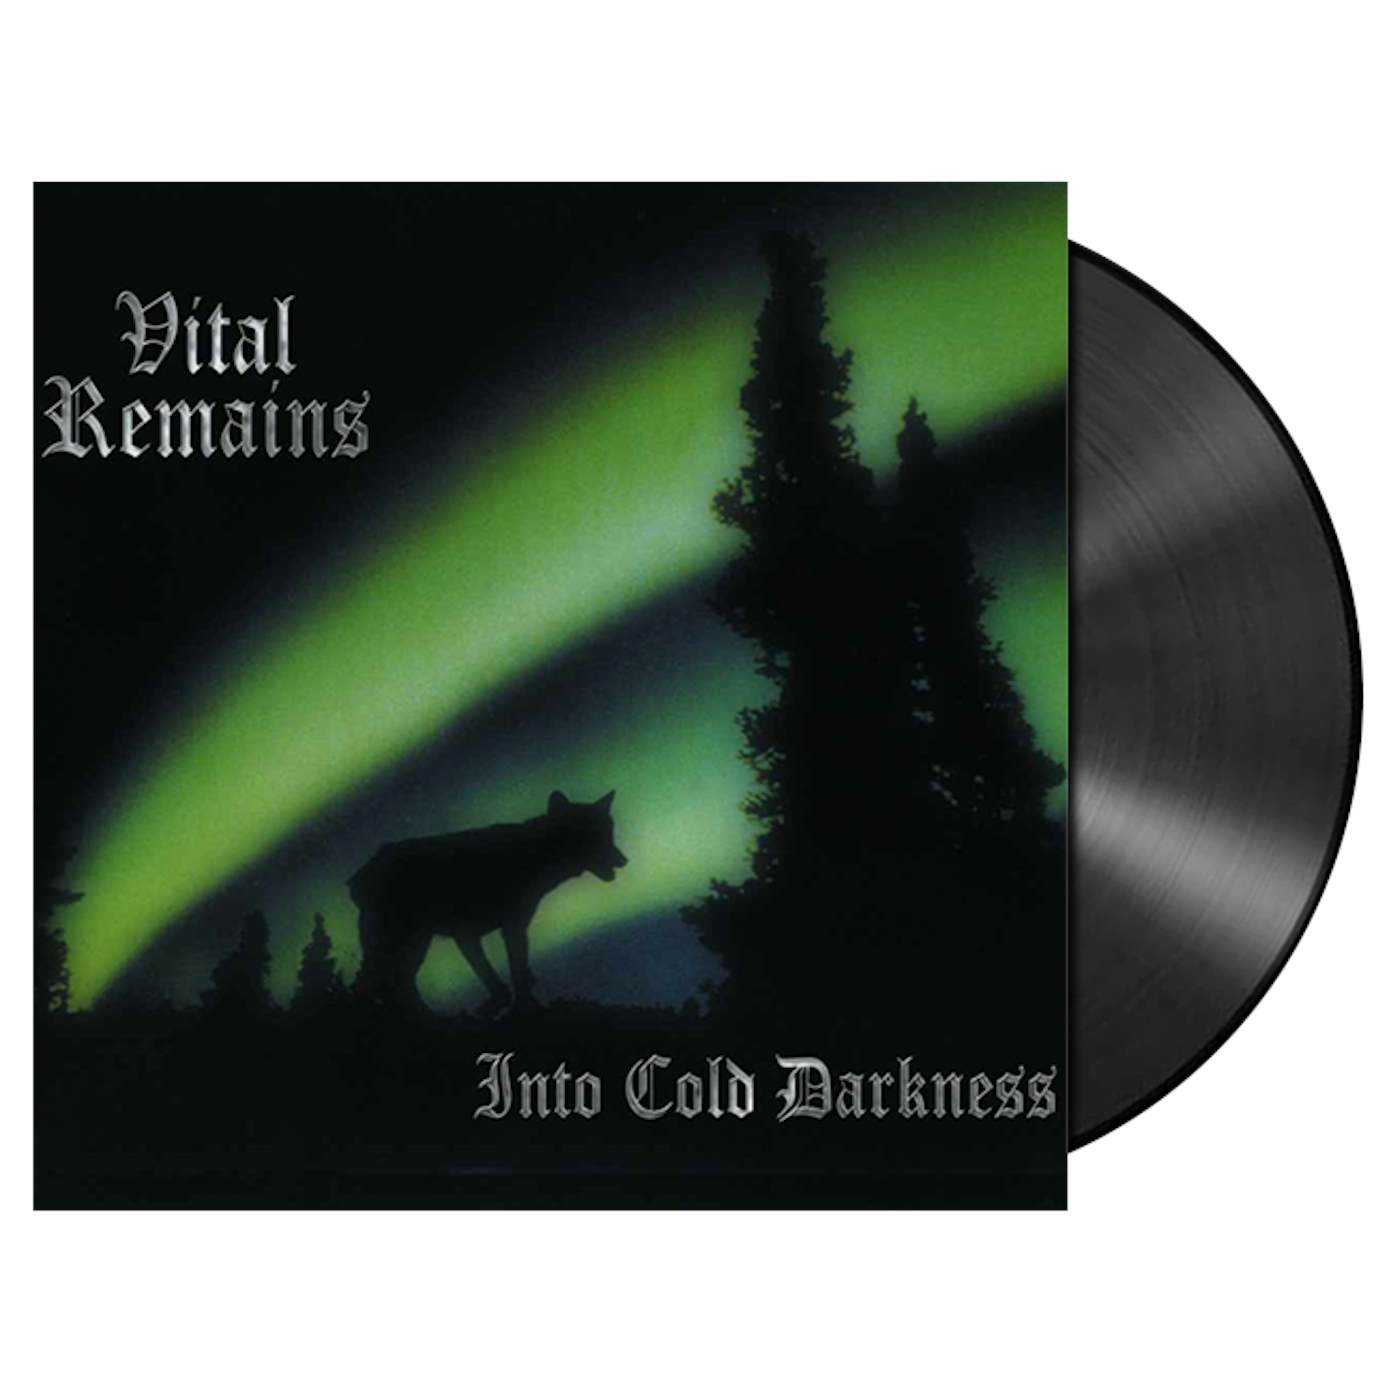 VITAL REMAINS - 'Into Cold Darkness' LP (Vinyl)